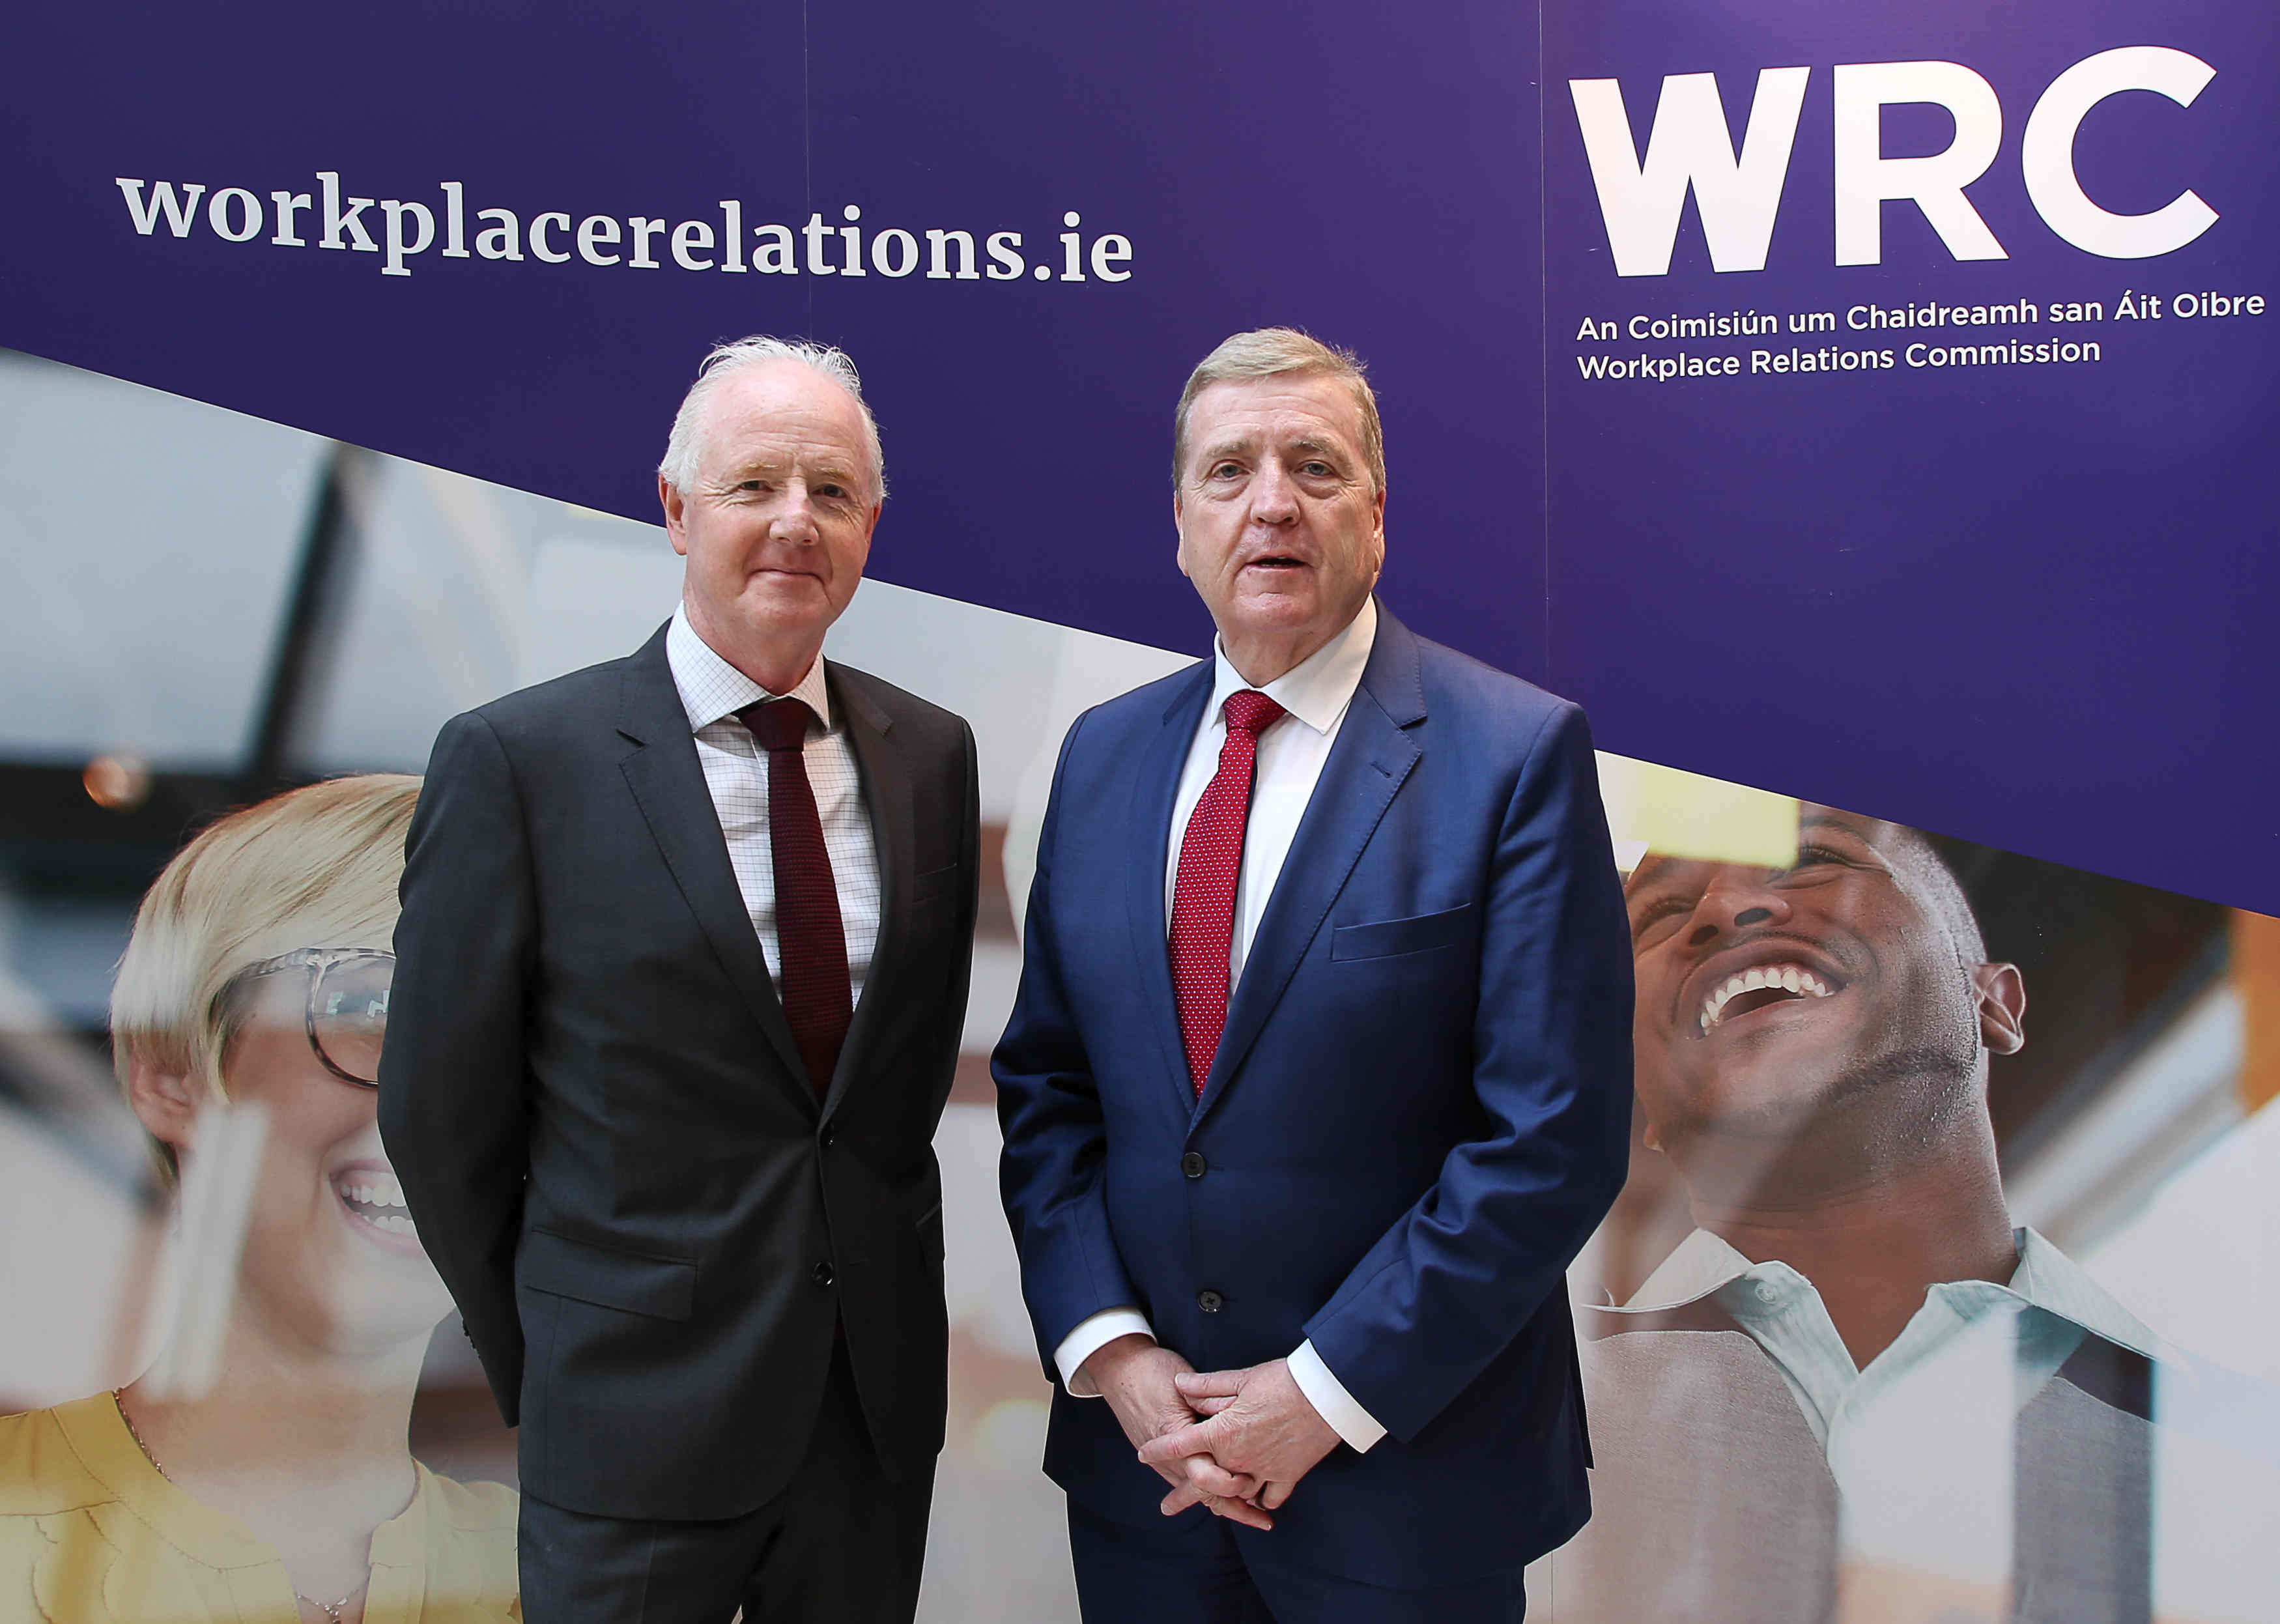 Image of WRC Director General Liam kelly and Minister Pat Breen